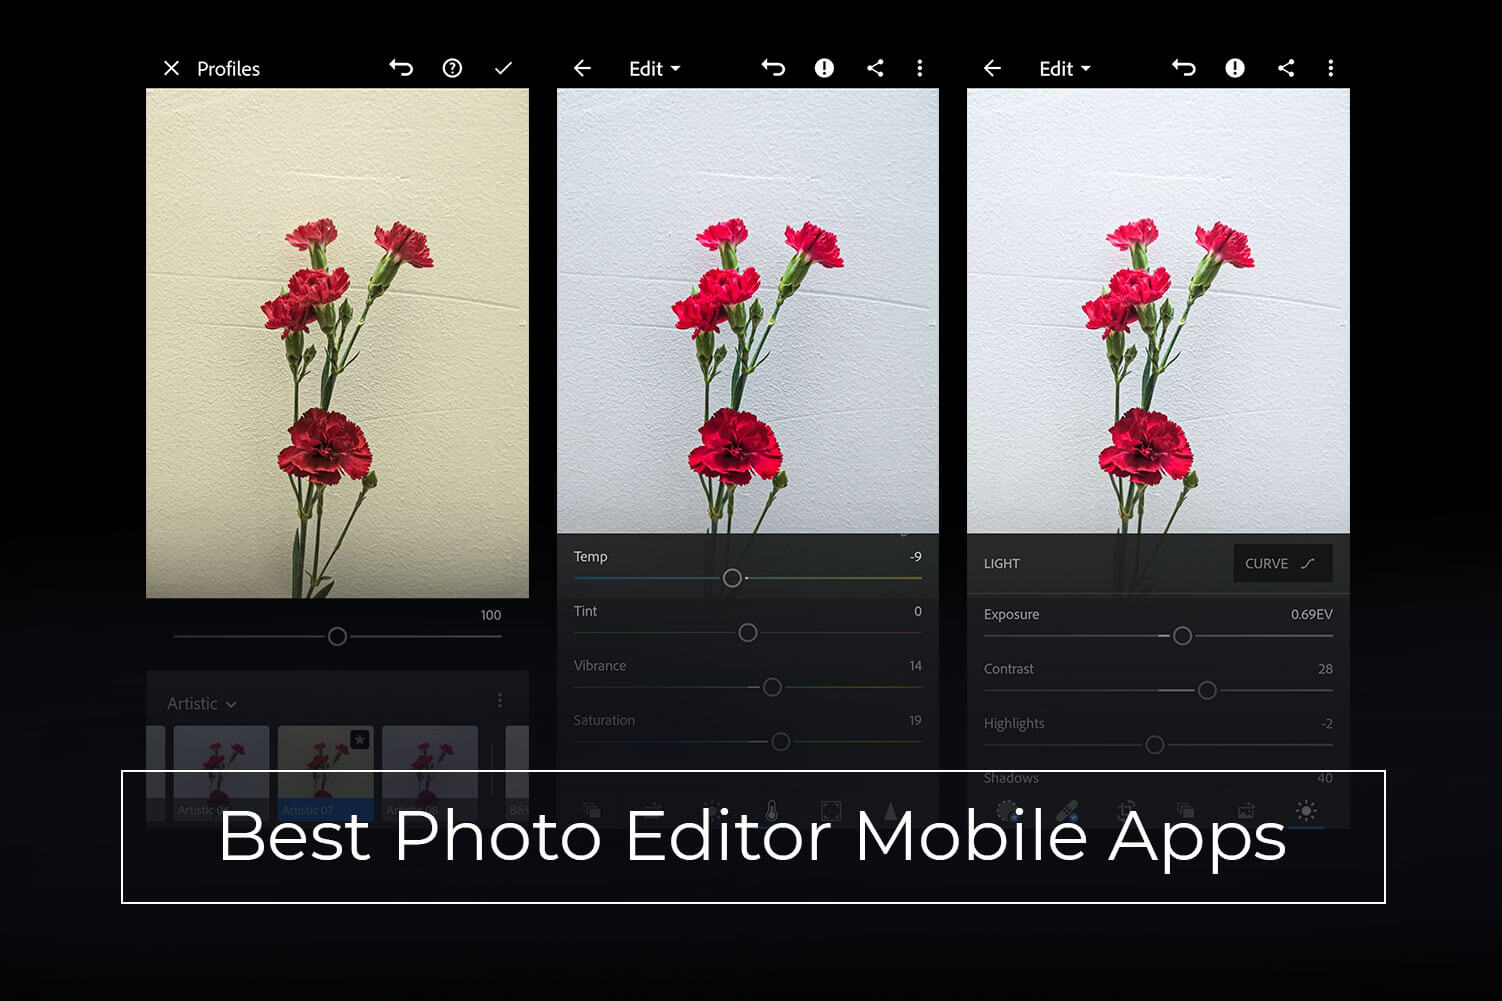 Best Photo Editor Mobile Apps